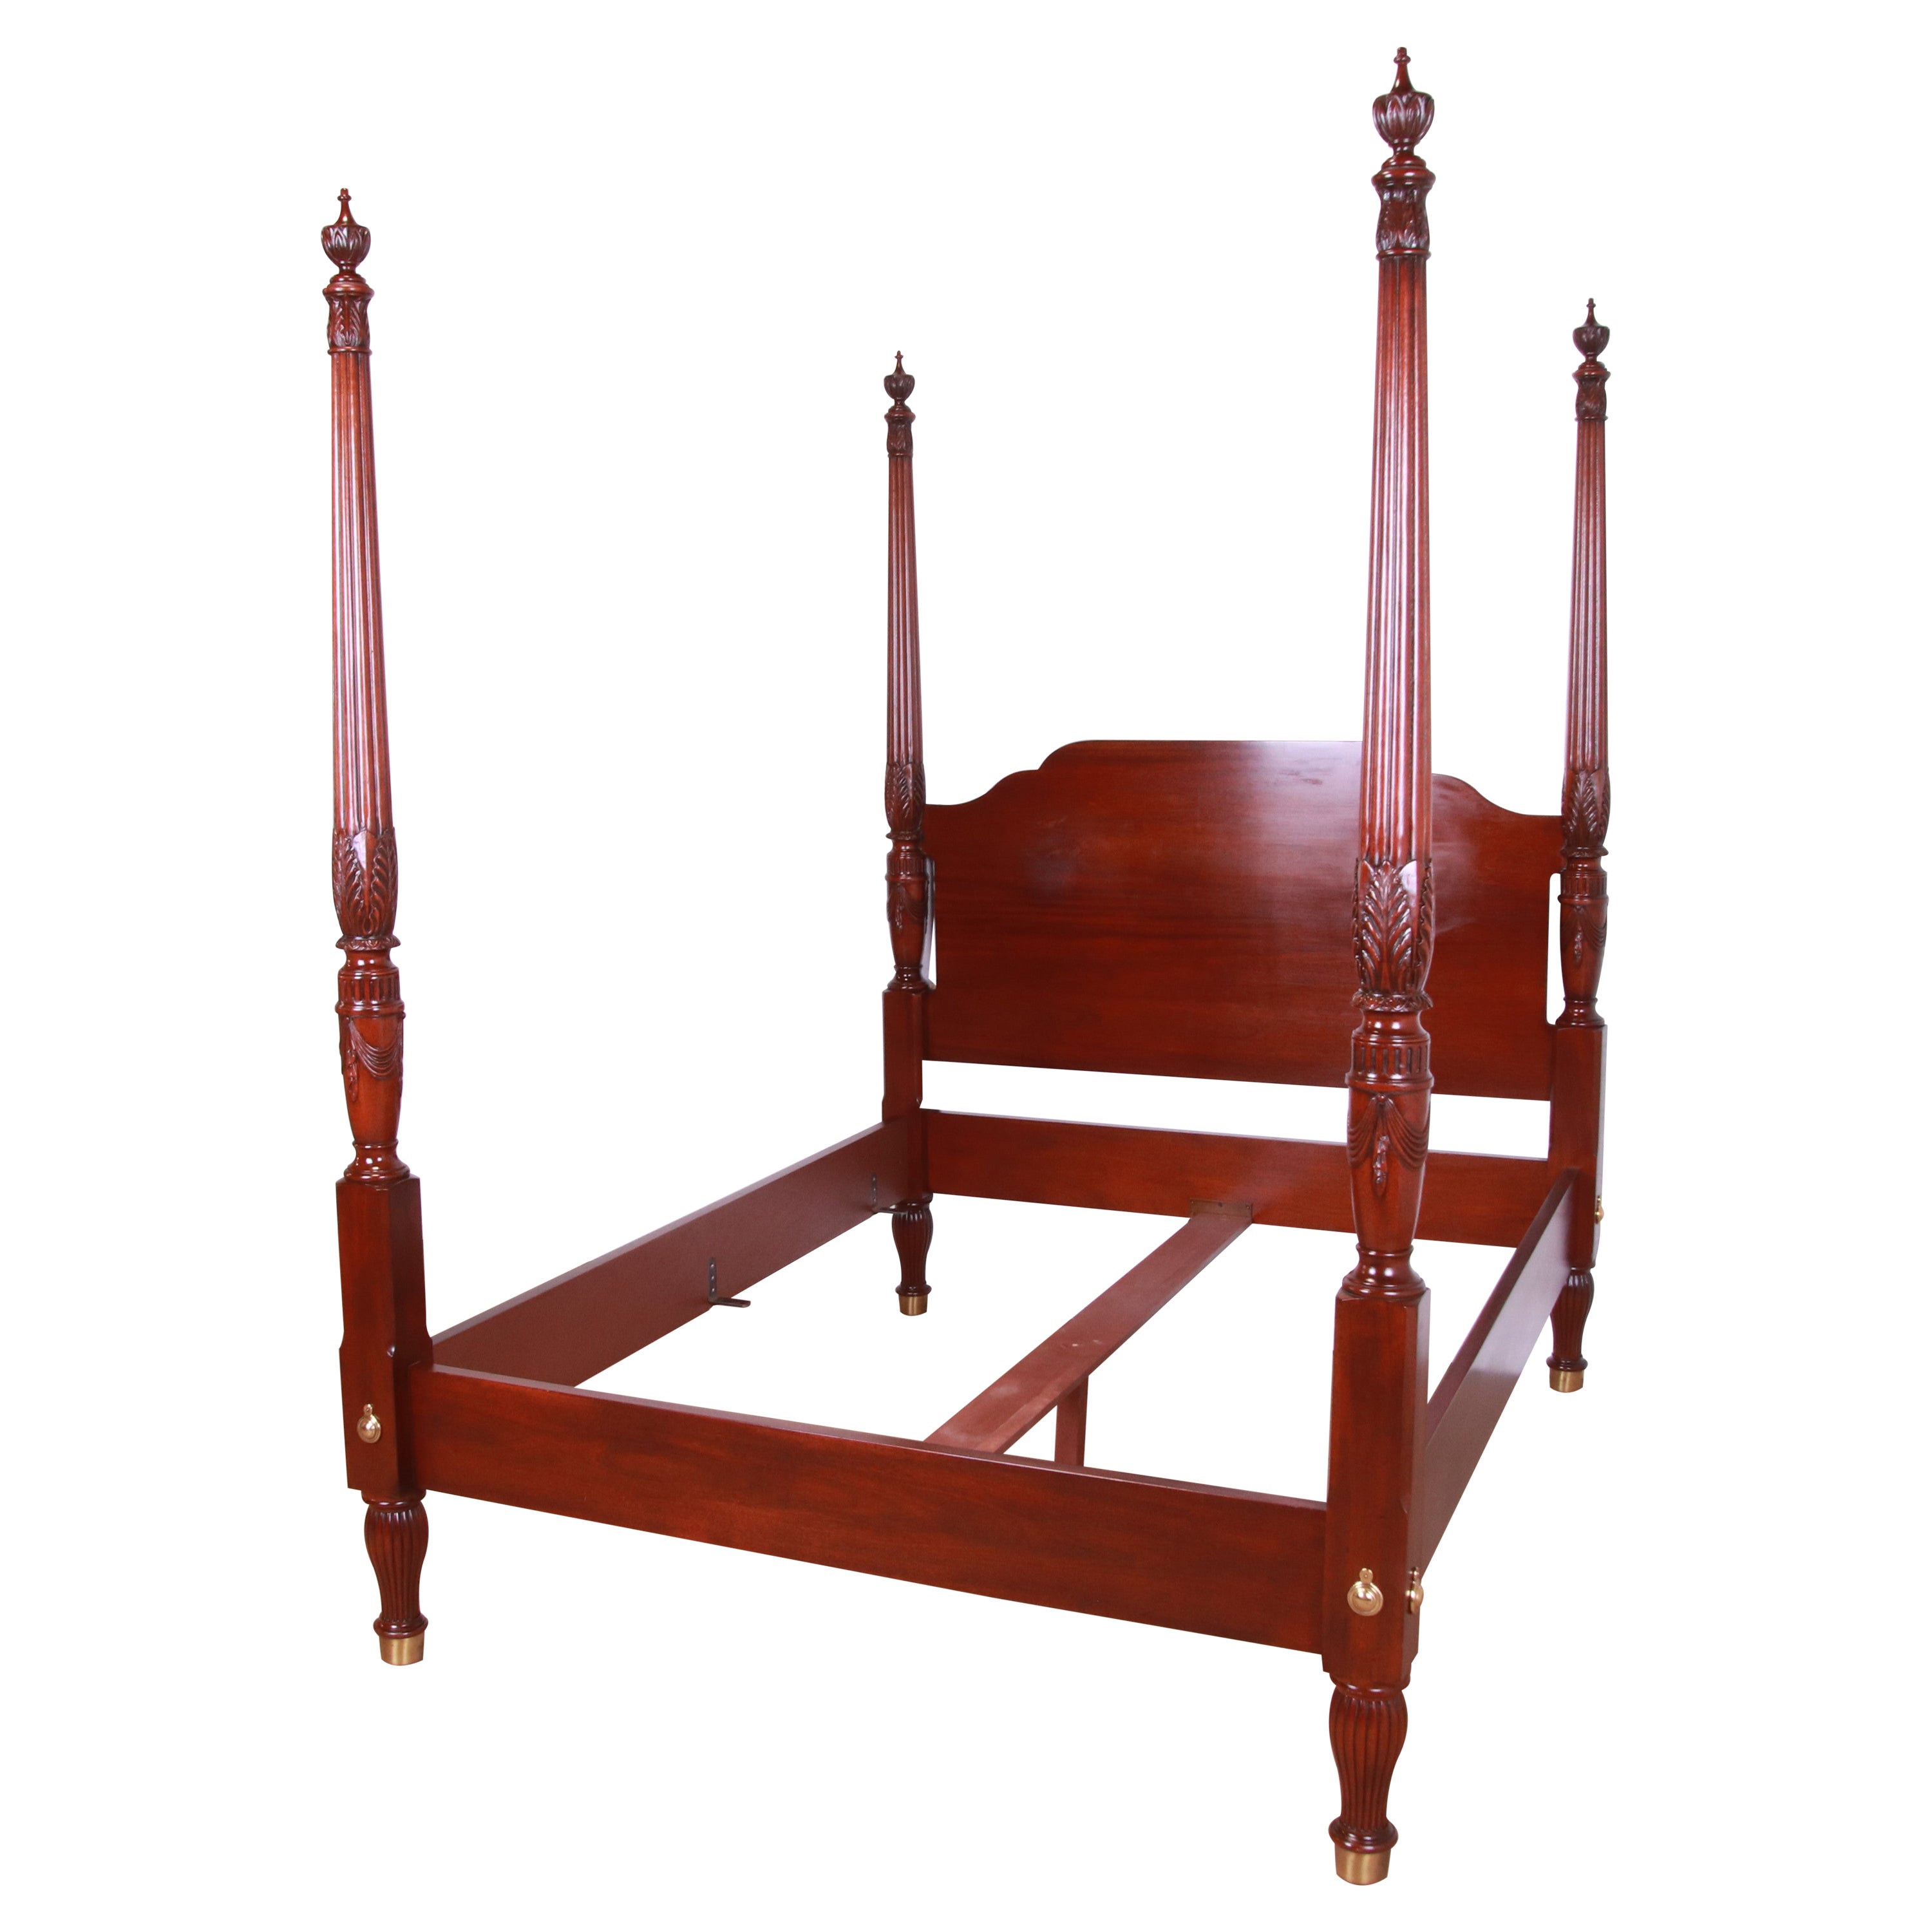 Baker Furniture Georgian Carved Mahogany Queen Size Poster Bed